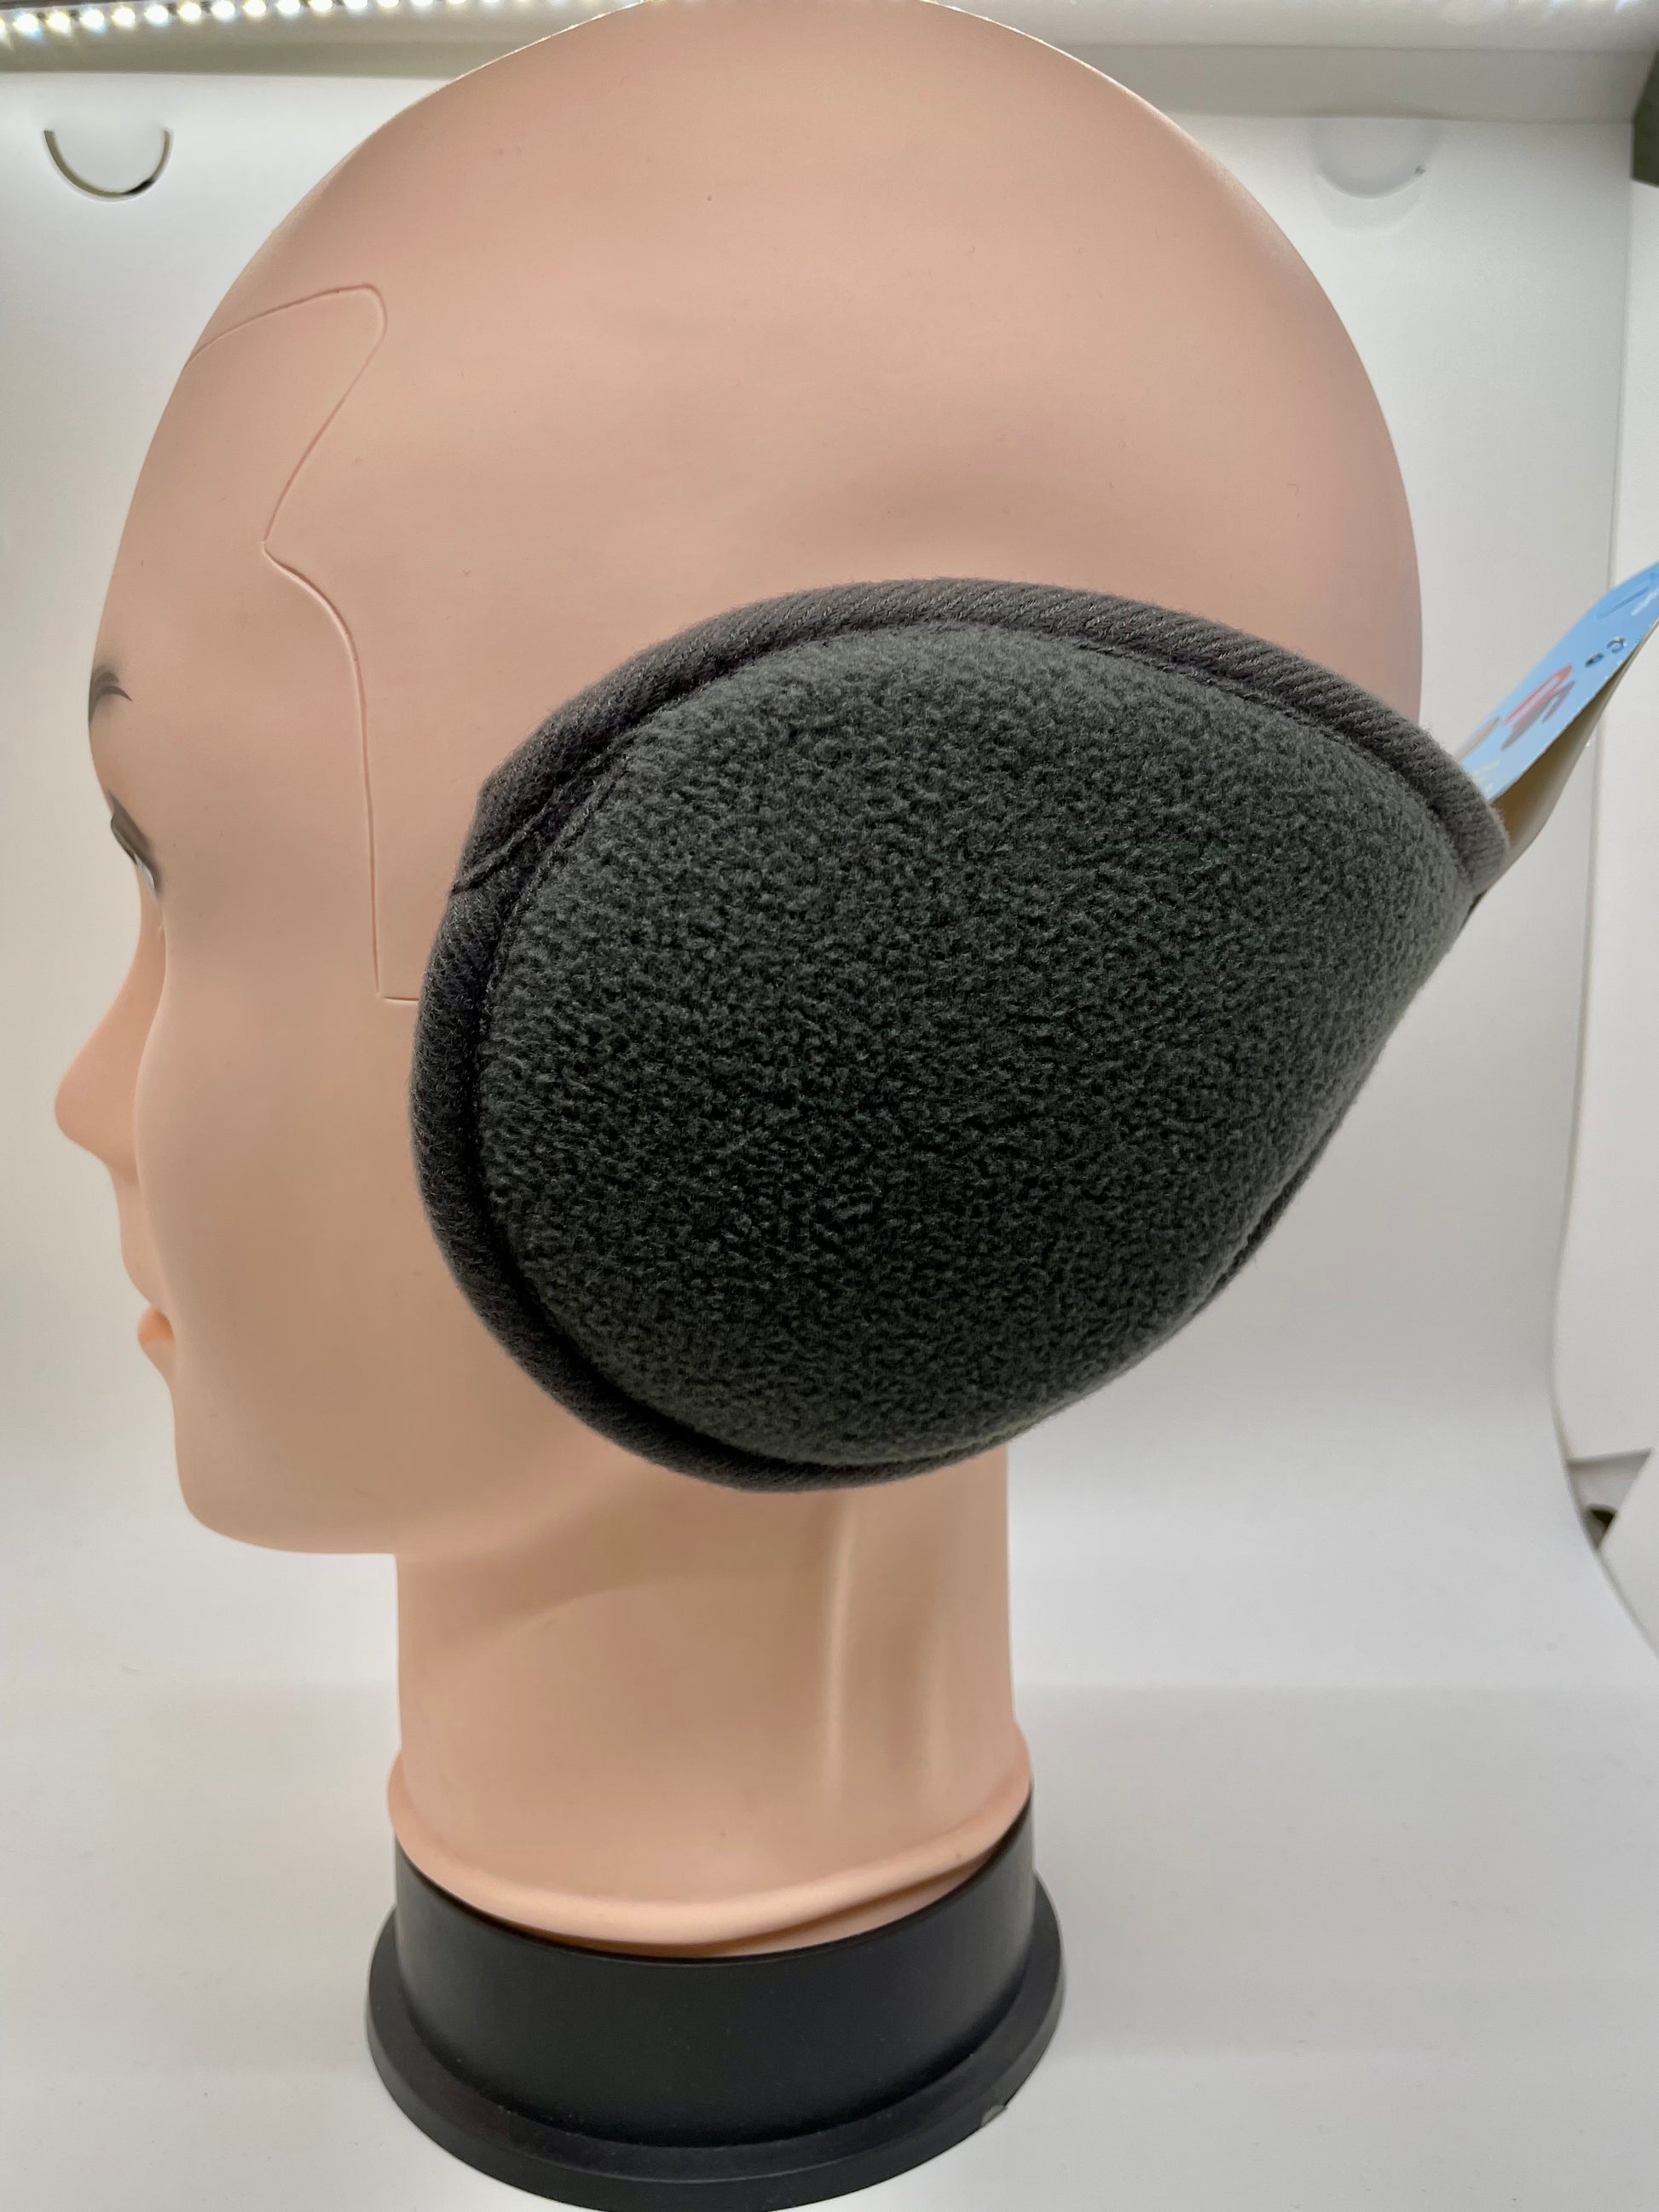 Gray ear muff with a fold-over cuff and cable knit pattern